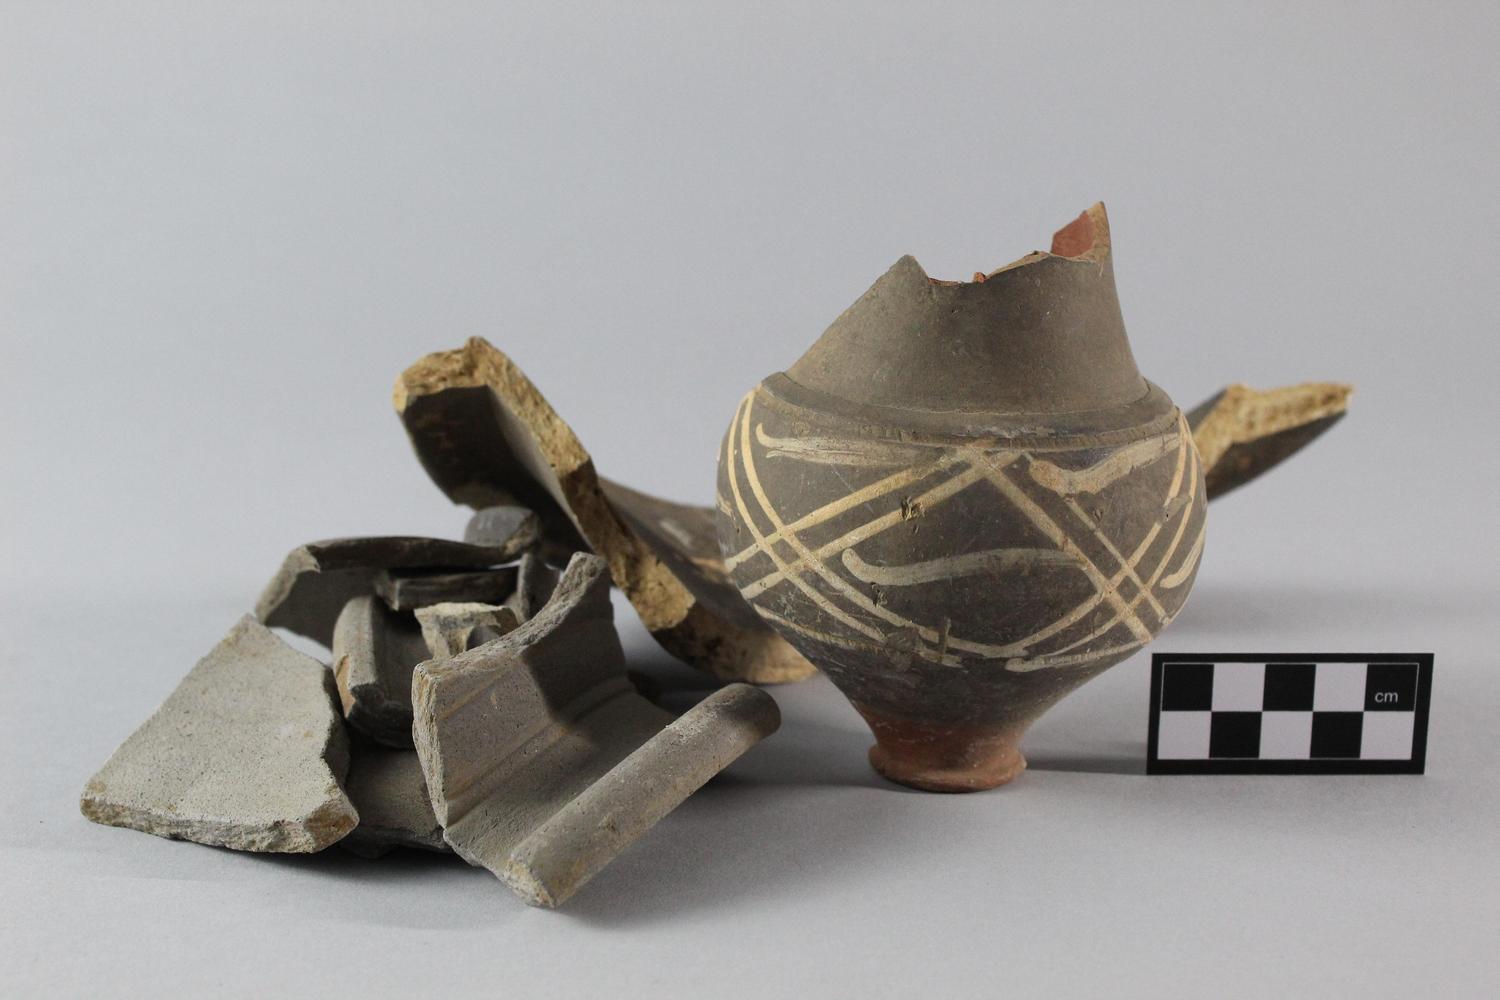 East Midlands Allied Press. Roman pottery found with burial during building works. PETMG:EMAP. Image: Peterborough Museum & Art Gallery